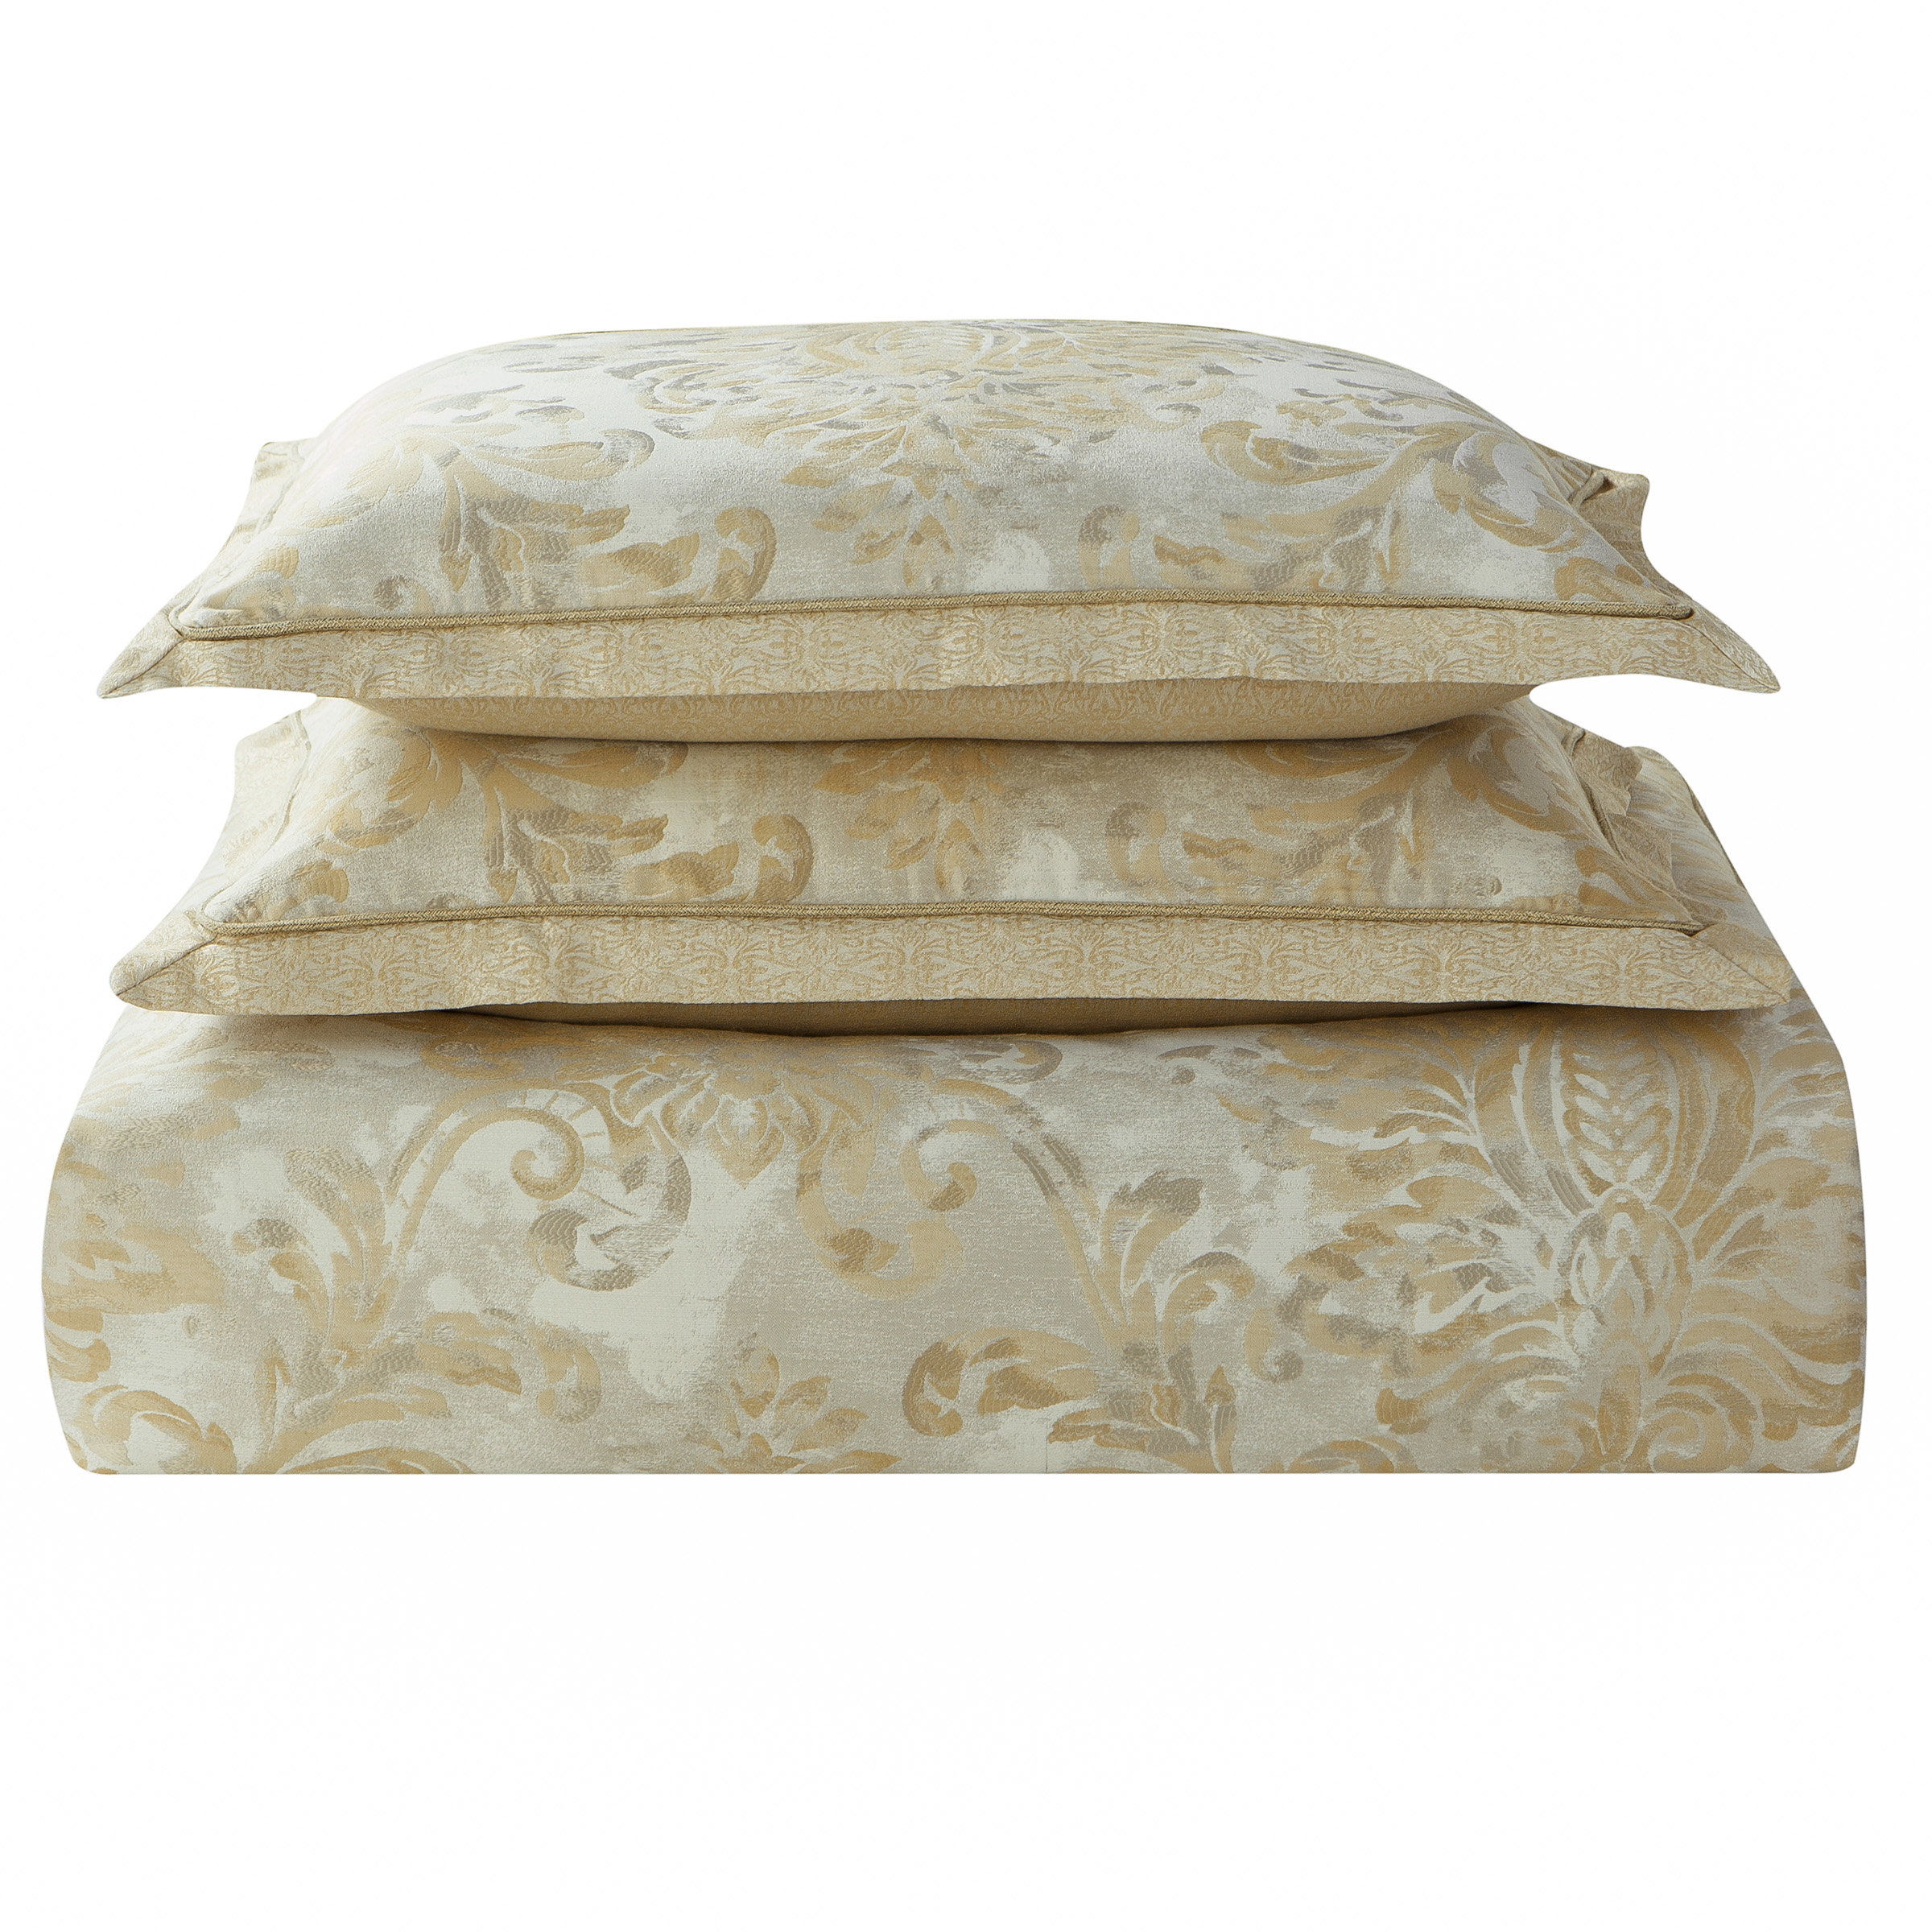 Waterford Bedding Ansonia 6PC Comforter Set & Reviews